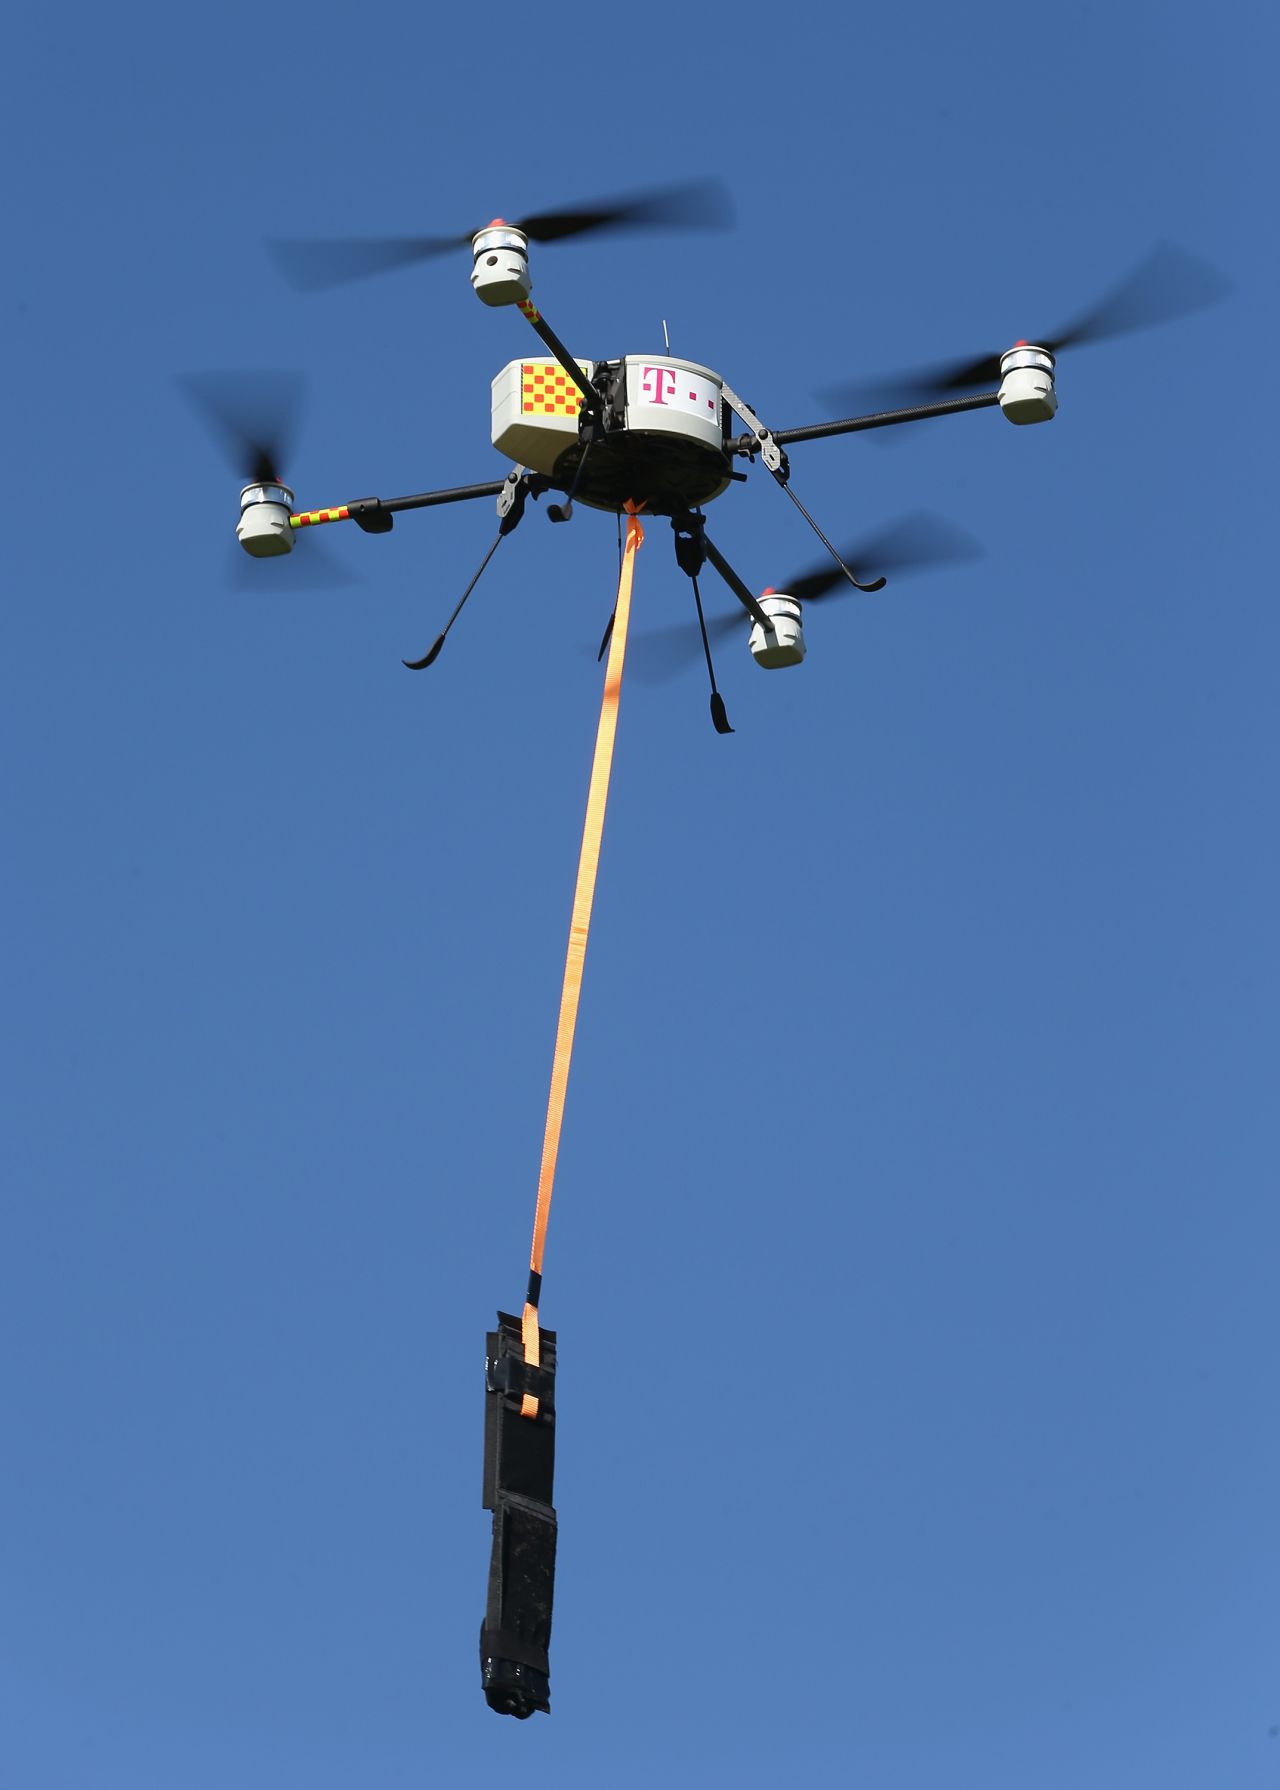 German communications provider <a href="http://www.telekom.com/home" target="_blank" target="_blank">Deutsche Telekom</a> is tired of people stealing their copper cables. So they contracted a company to tag overhead telephone cables with drones across Germany in an effort to fight theft of the cables, which has shot up in recent years with the value of copper.